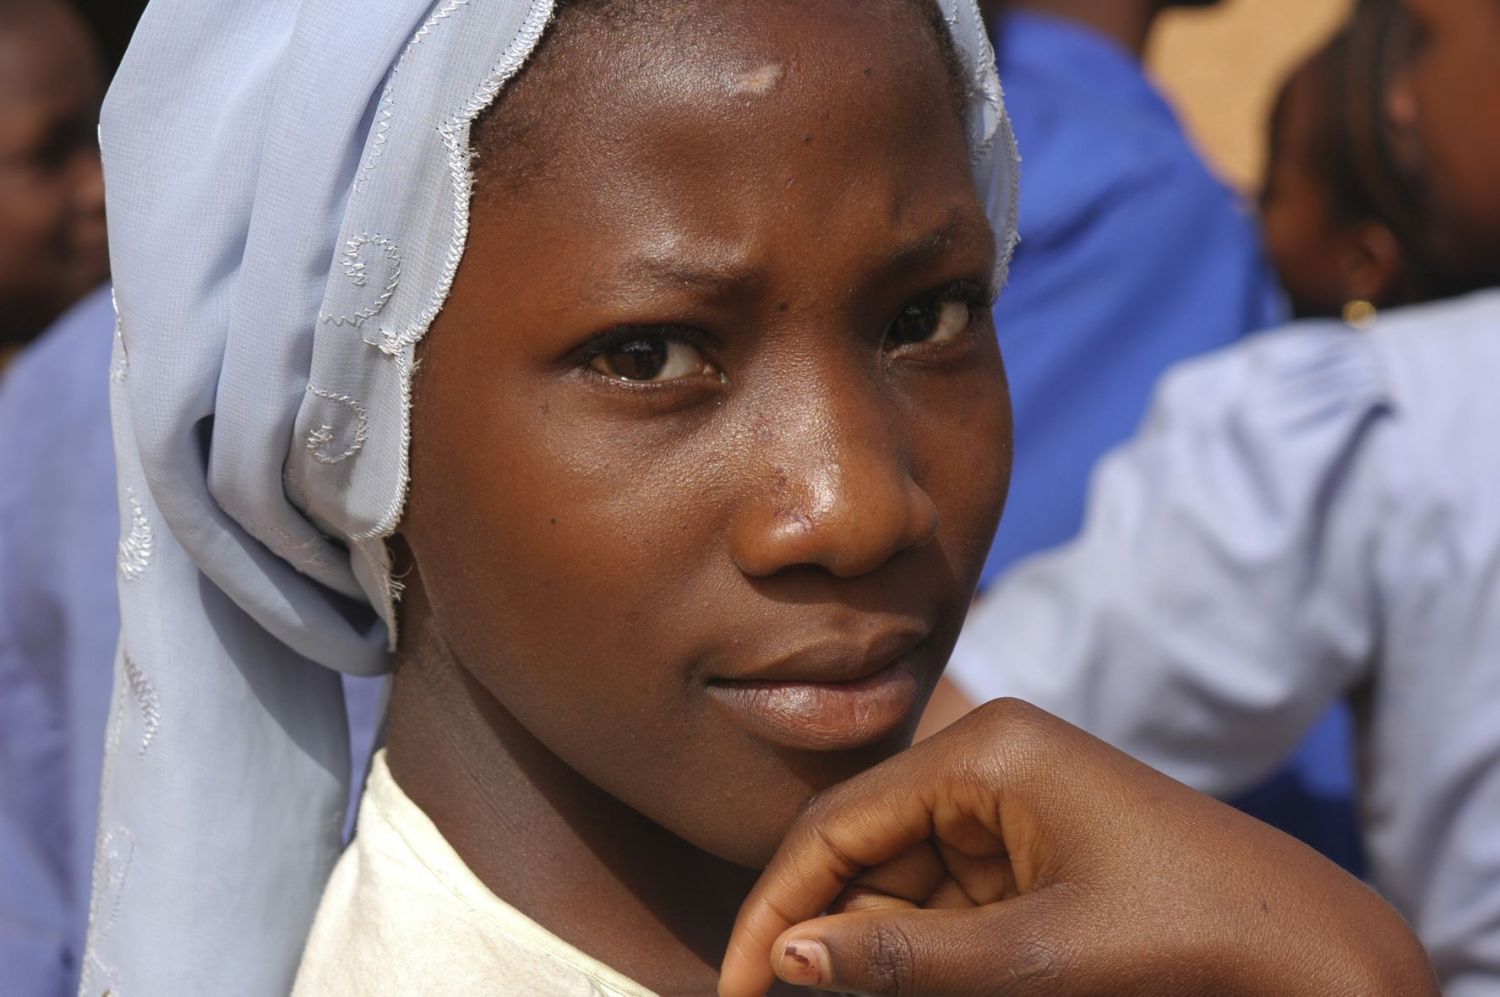 CIRCA 2009 Niger, Niamey, Portrait of an african muslim schoolgirl with a blue scarf covering her hair, and holding her hand before her mouth.